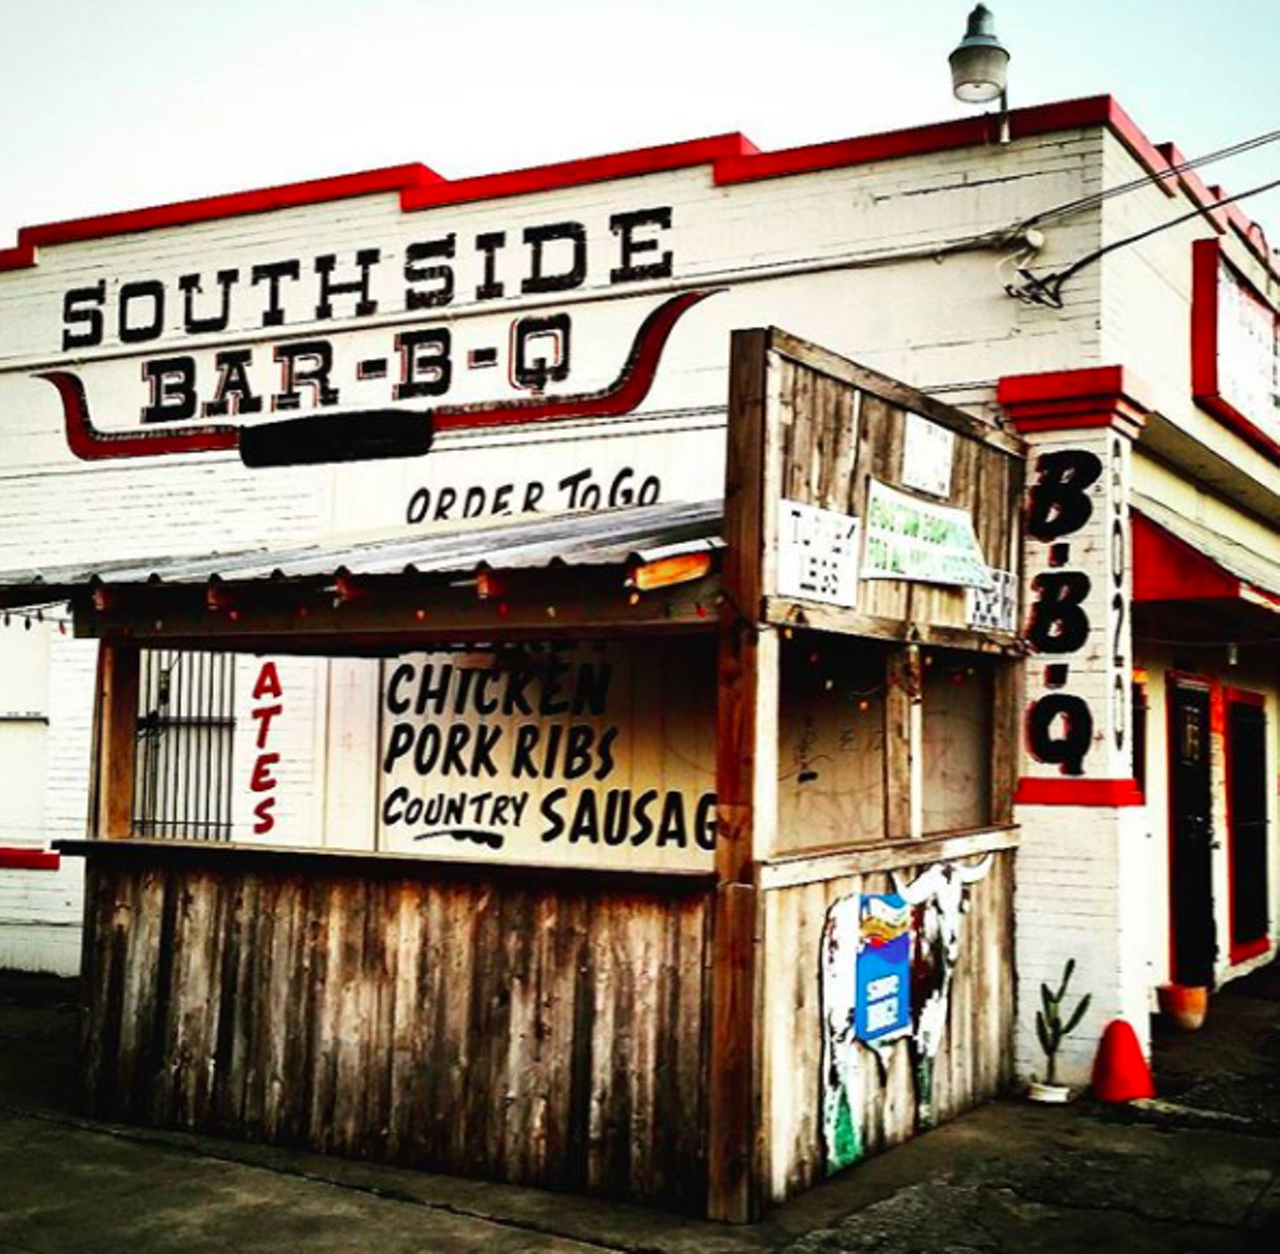 Southside BBQ
6020 S Flores St., (210) 927-0227, southsidebb-q.com
Nestled in the heart of Harlandale, Southside BBQ brings traditional meats like brisket, beef ribs, sausage, pulled pork and chicken. Oh, and you can’t forget about turkey legs. This spot will have you lickin’ your fingers with just one taste.
Photo via Instagram / humpdayfunday